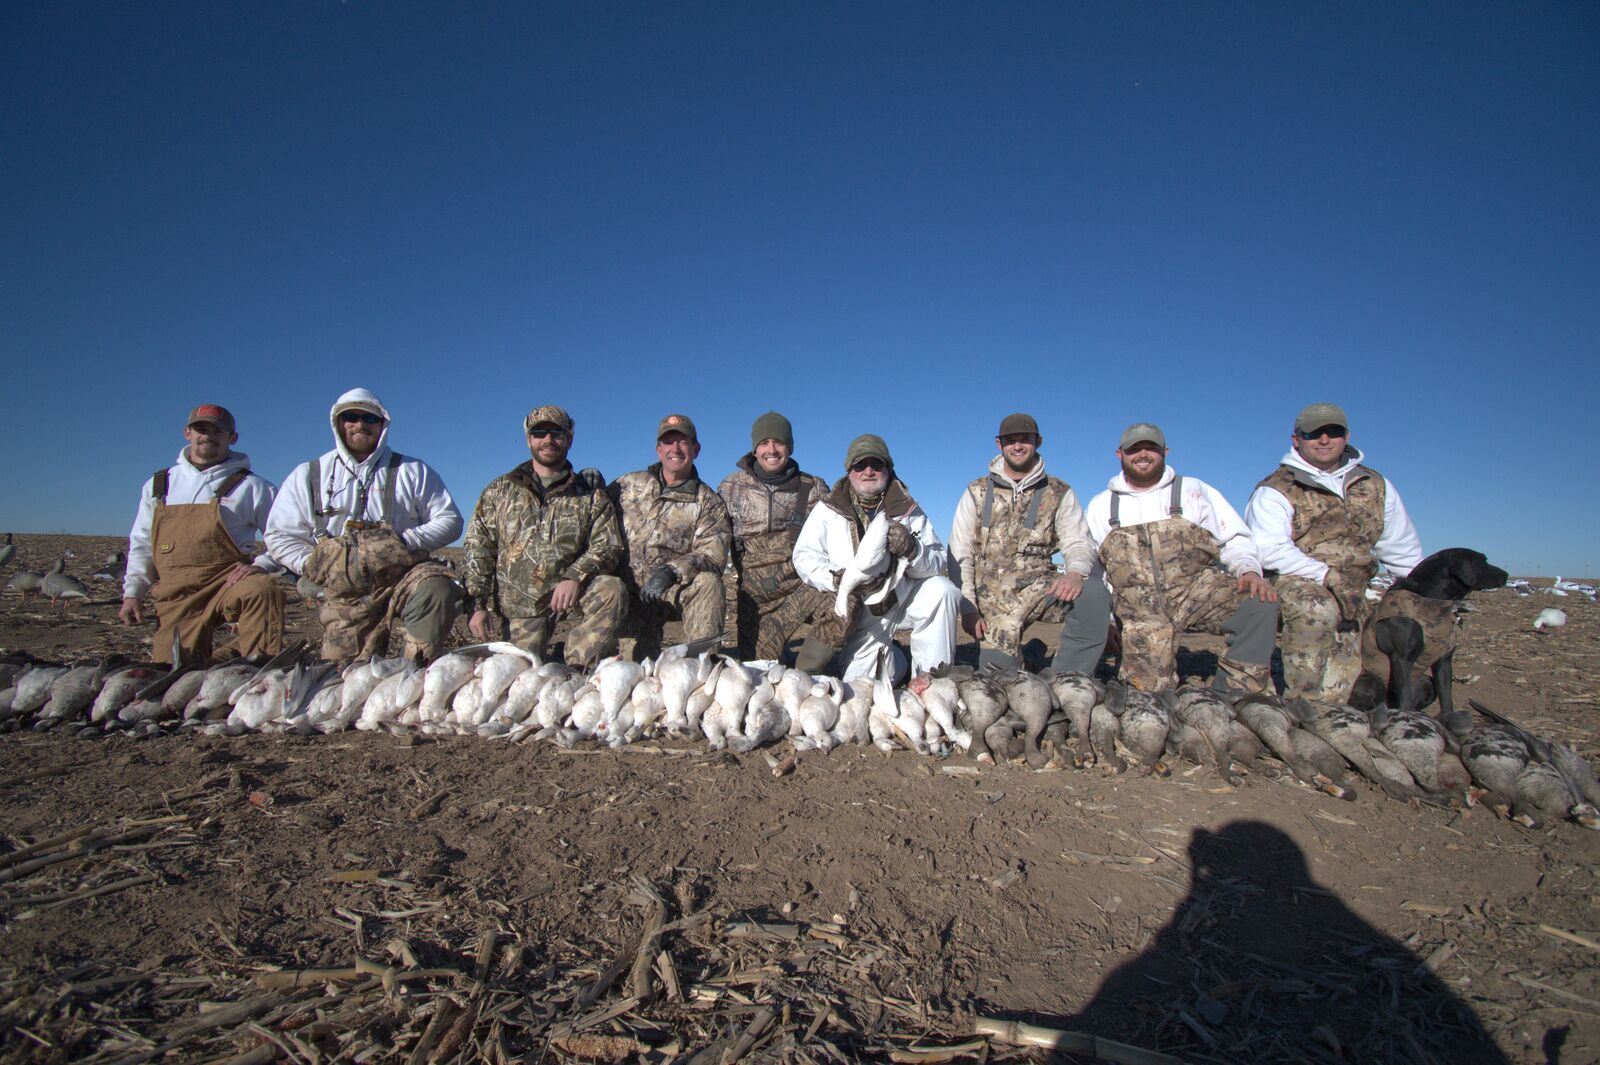 OKLAHOMA DUCK HUNTING 4 Ramsey Russell's